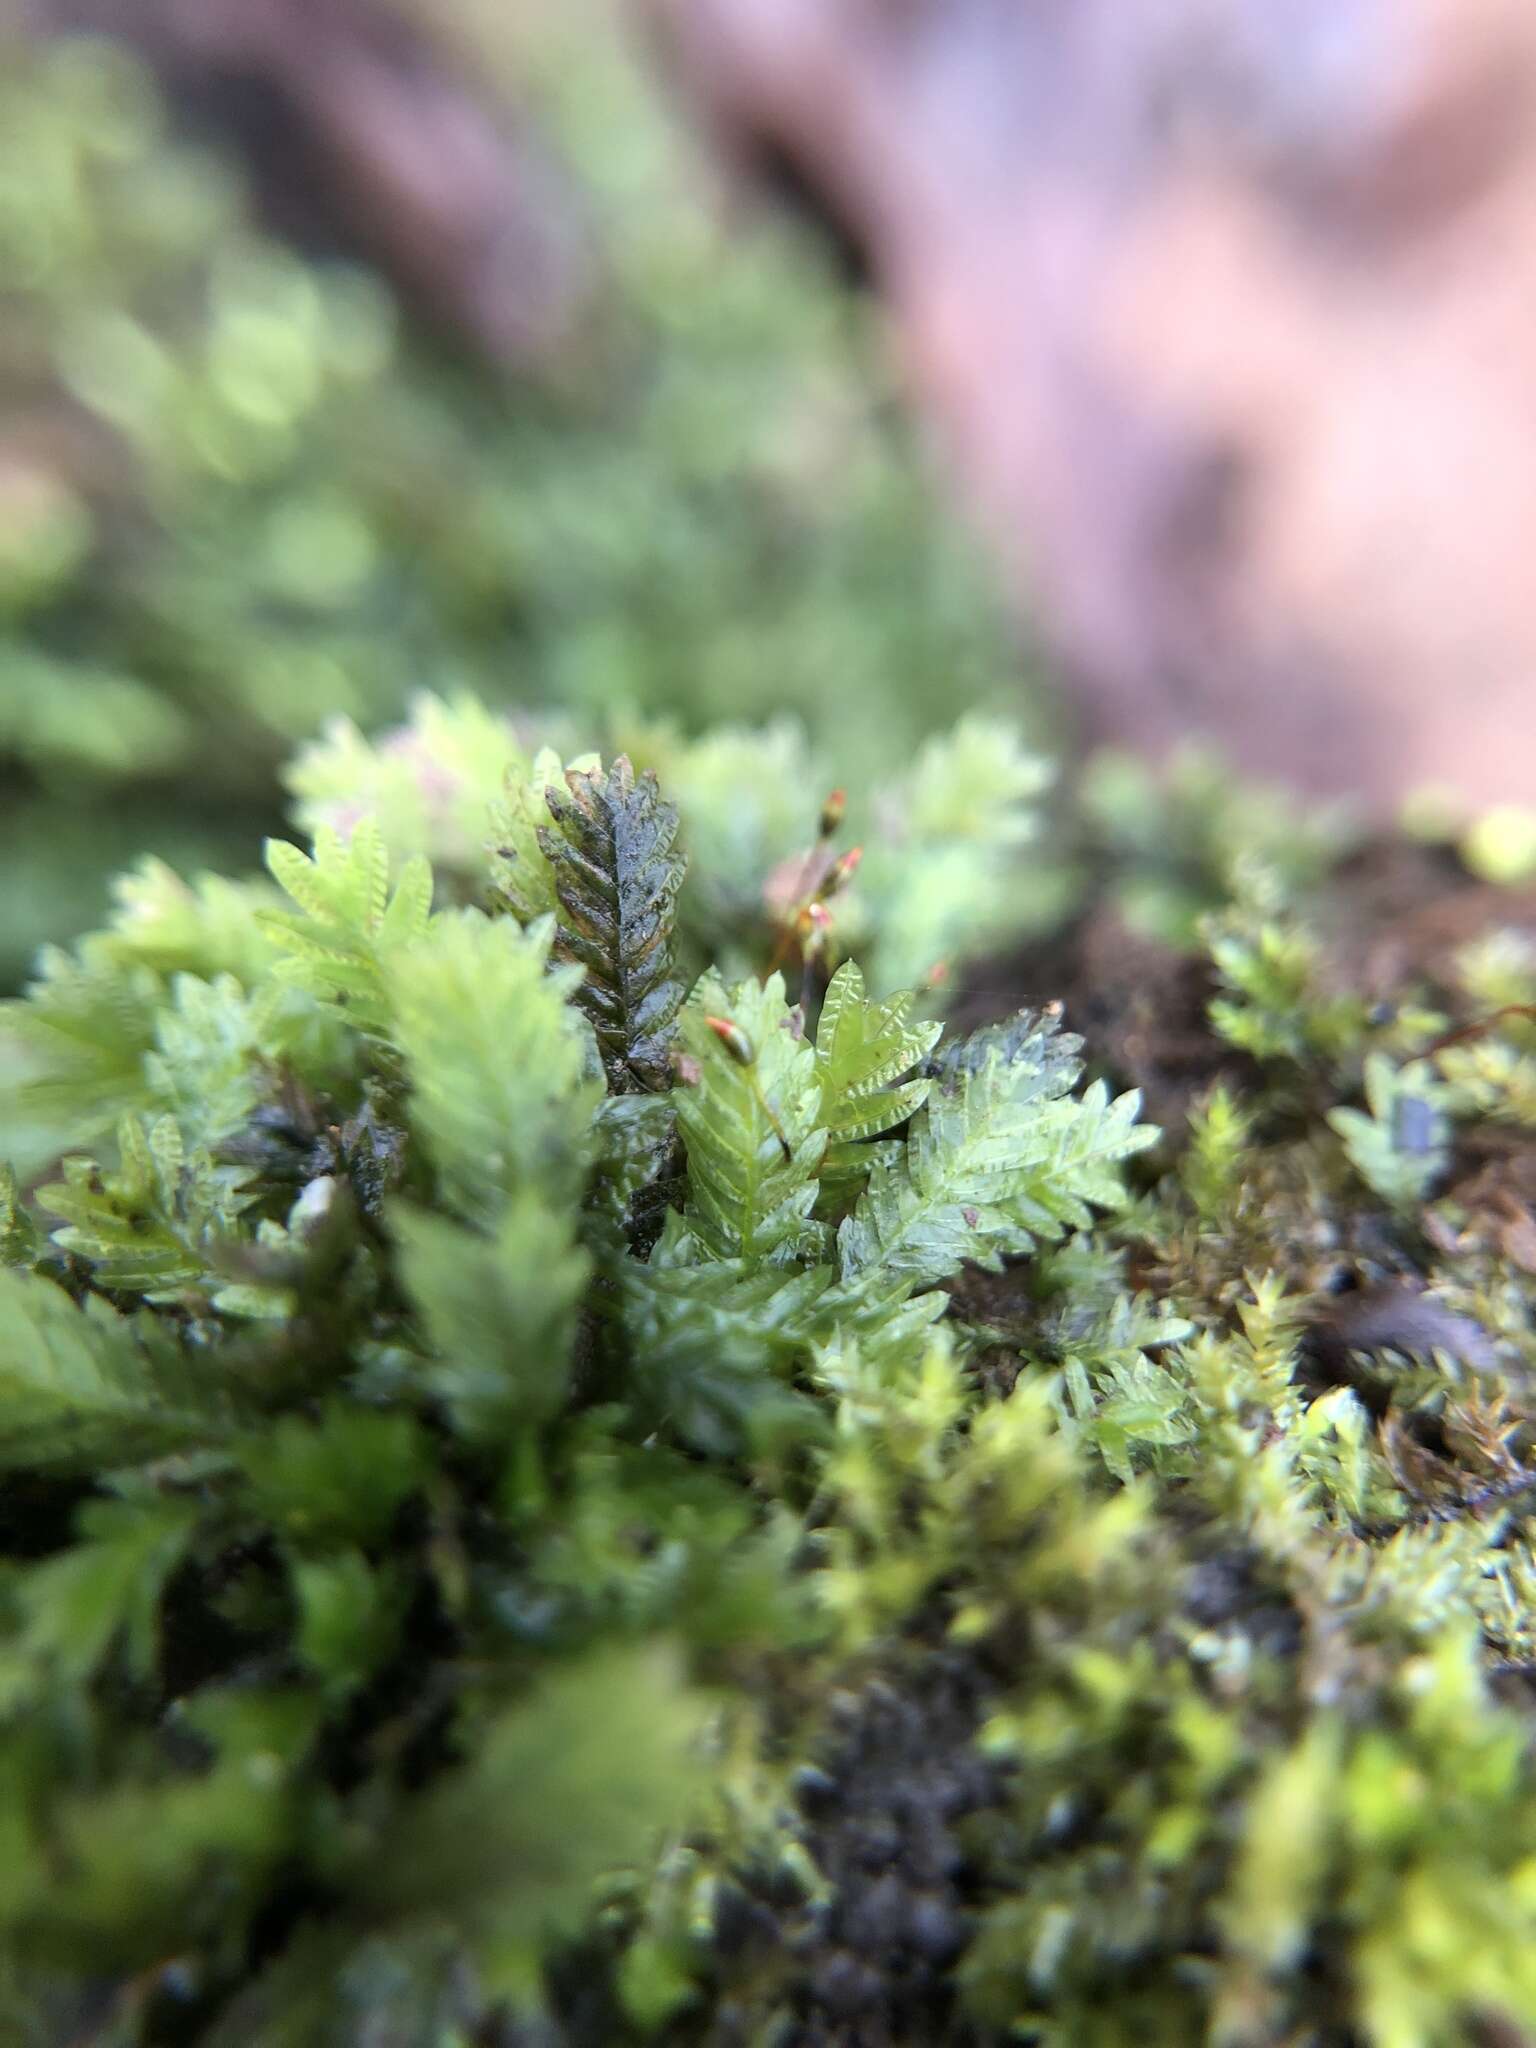 Image of fissidens moss